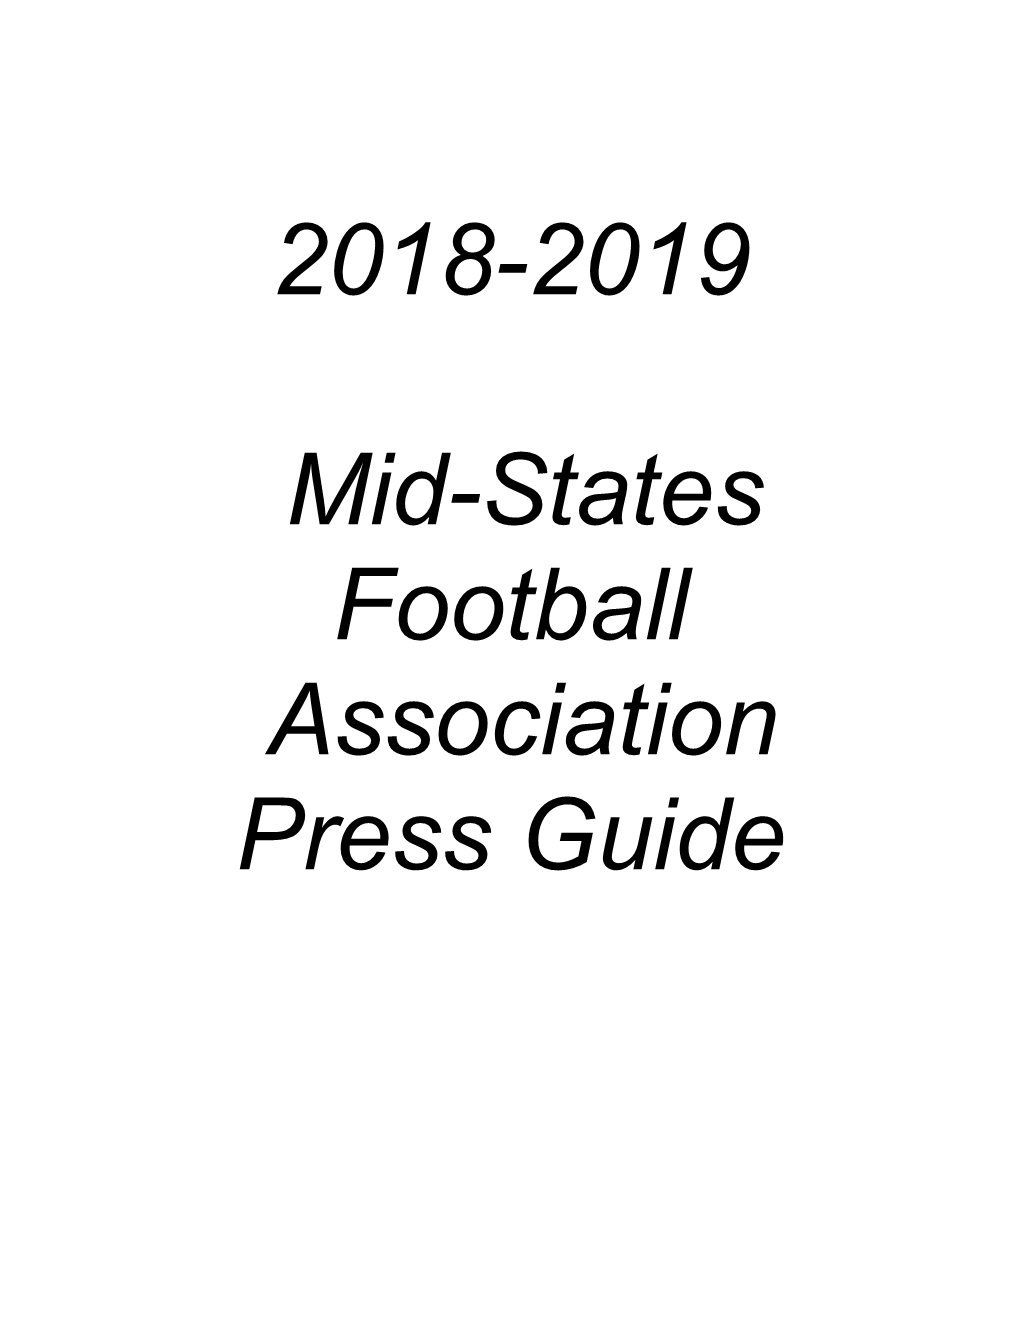 2018-2019 Mid-States Football Association Press Guide